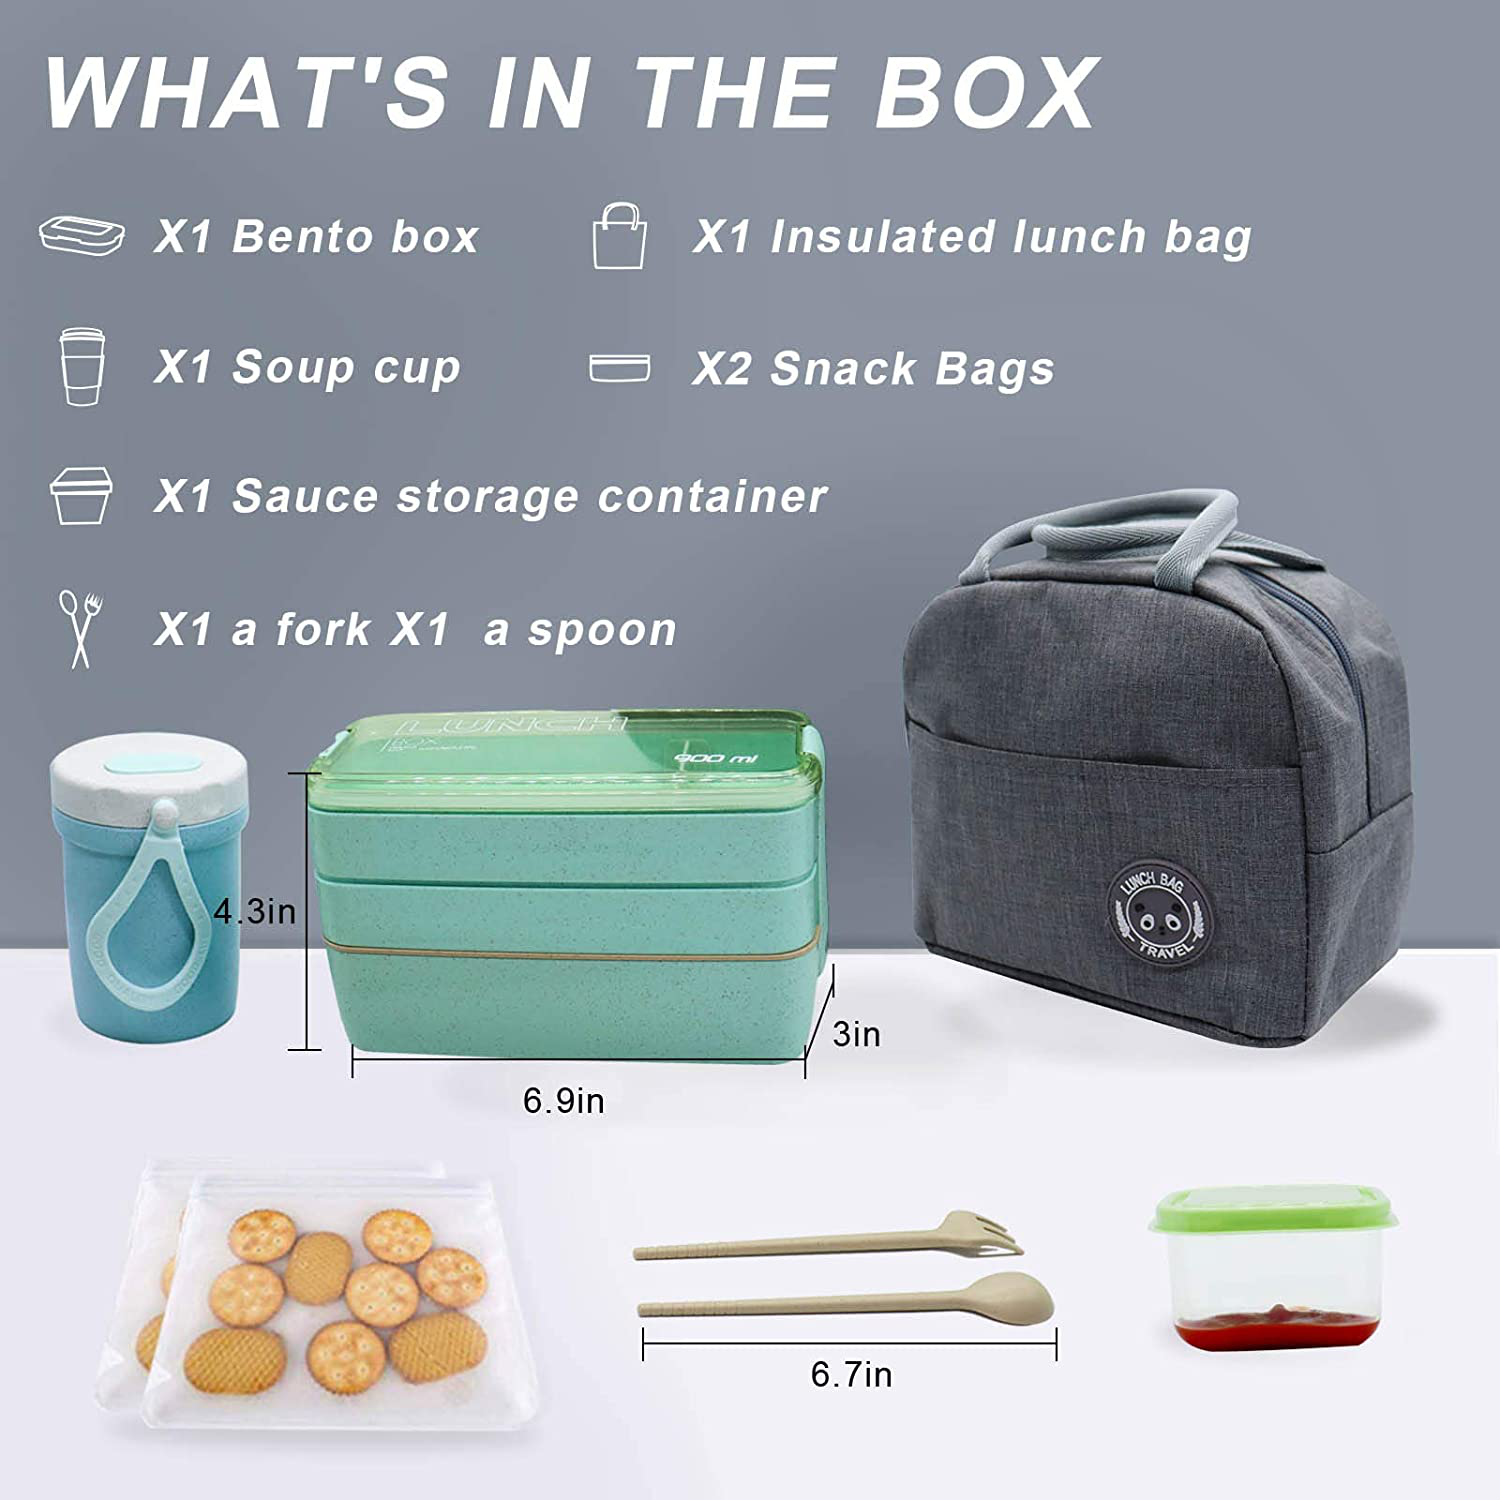 Bento Box, 3-In-1 Meal Prep Container, 900ML Janpanese Lunch Box